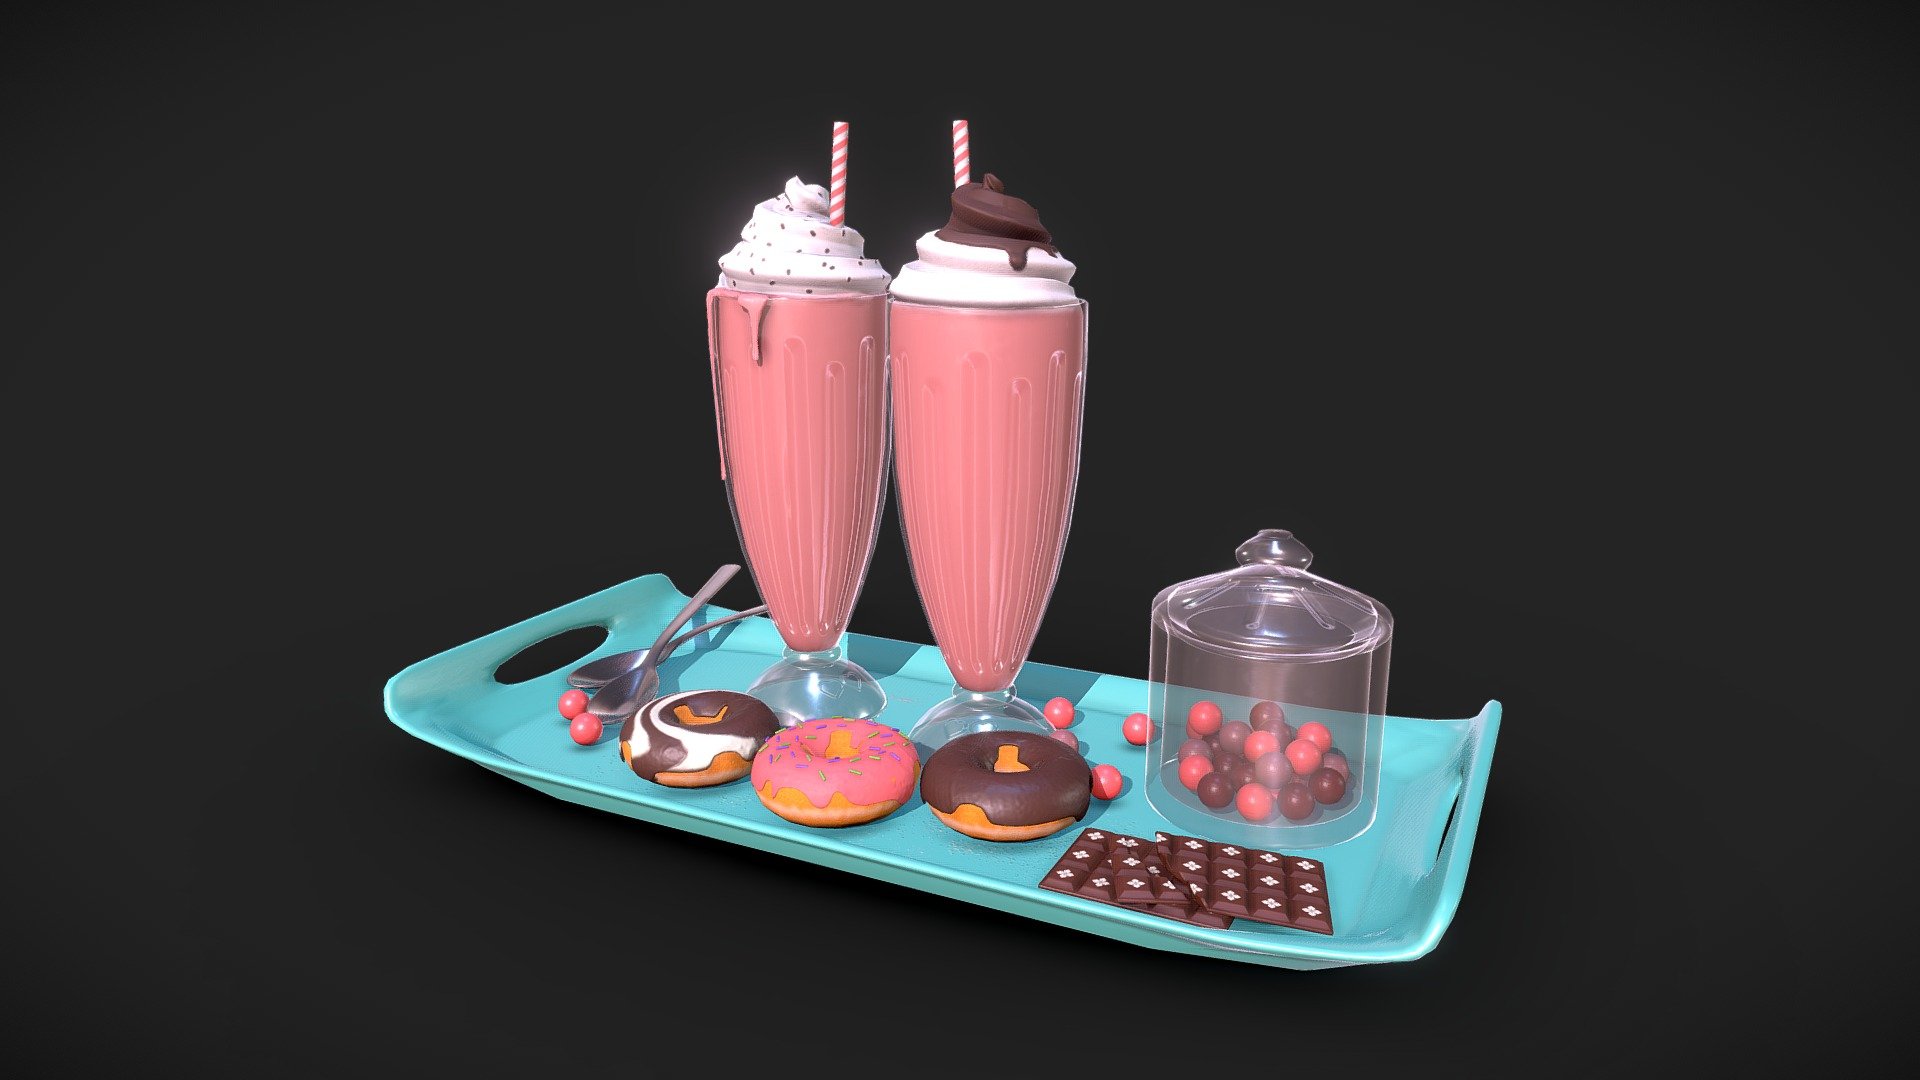 4k texture maps
1 texture sets

-Ambient occlusion
-Opacity map
-Normal map
-Metalness
-base color
-Roughness map - Milk Shakes - Buy Royalty Free 3D model by Pratibha (@Camay) 3d model